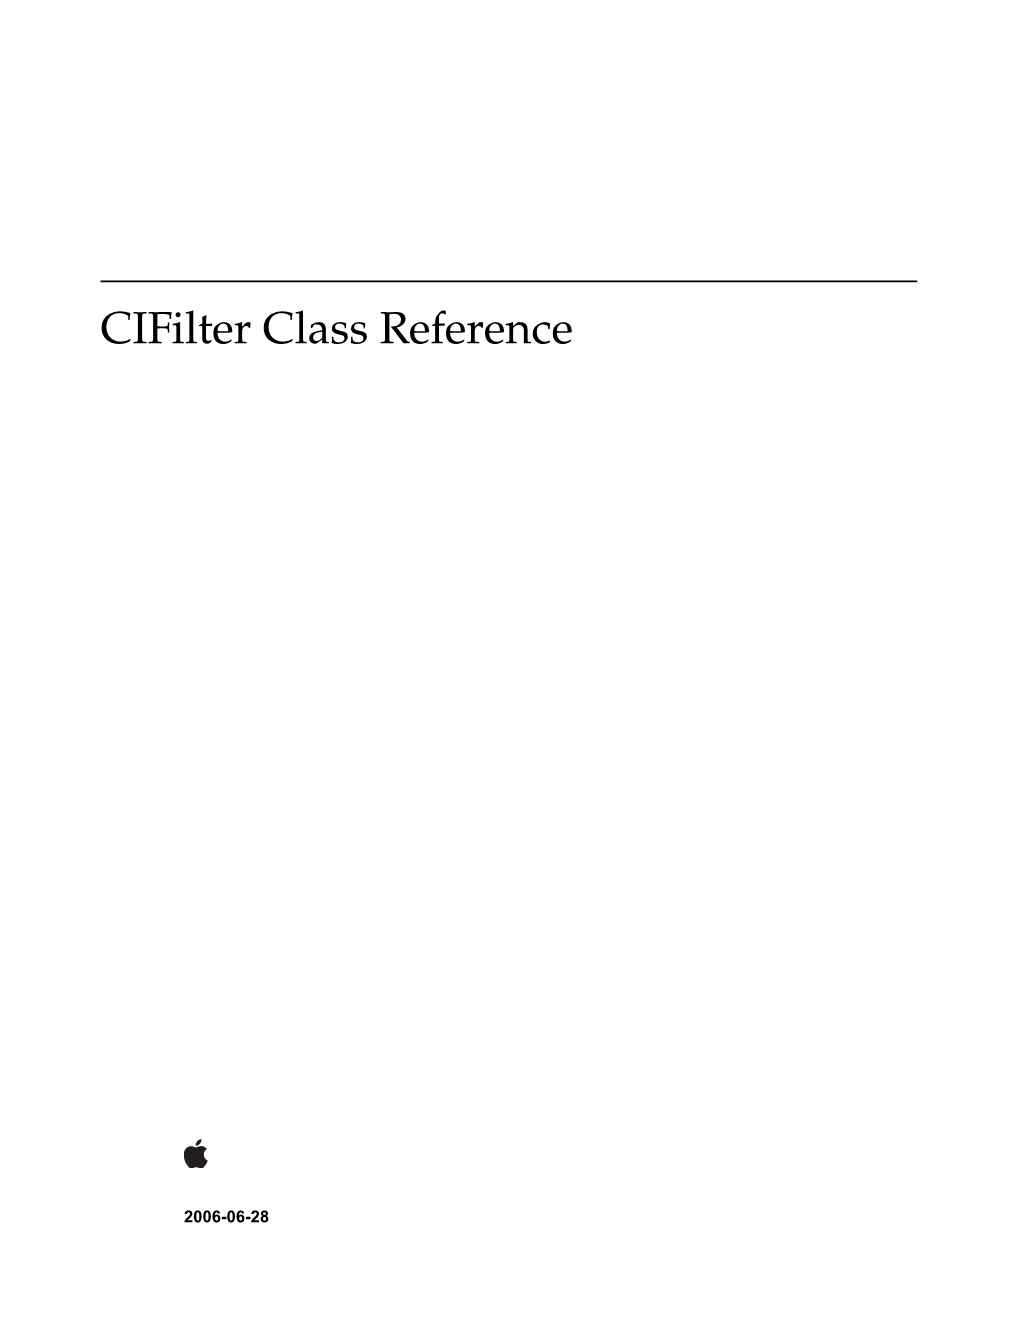 Cifilter Class Reference